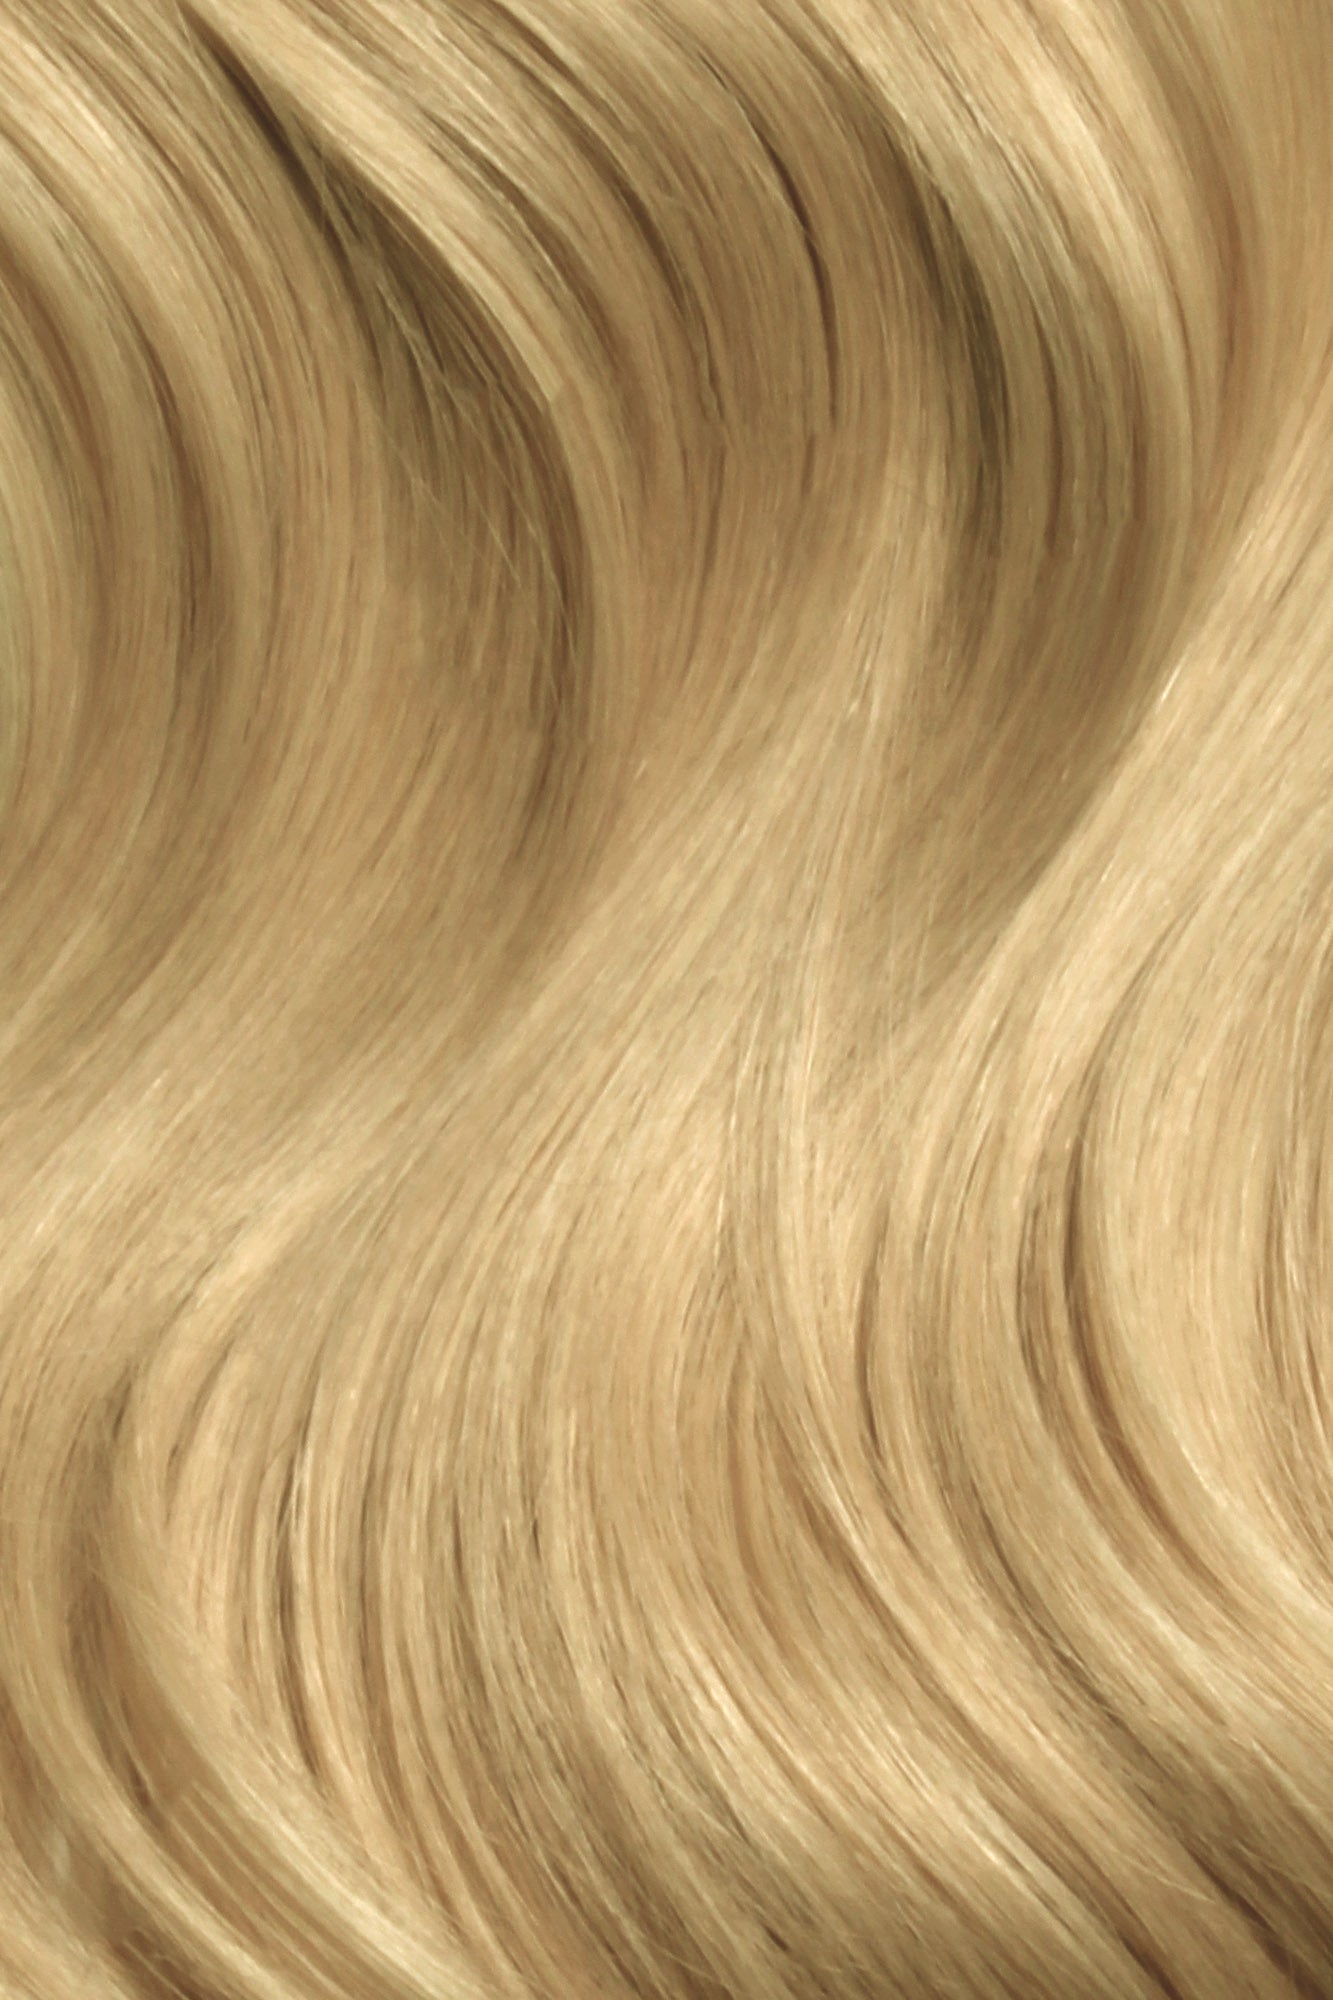 Nano Bonds 22 Inches - SWAY Hair Extensions Hollywood-Blonde-18-613 Ultra-fine, invisible bonds for a flawless, natural look. 100% Remy Human hair, lightweight and versatile. Reusable and perfect for individual or salon use.